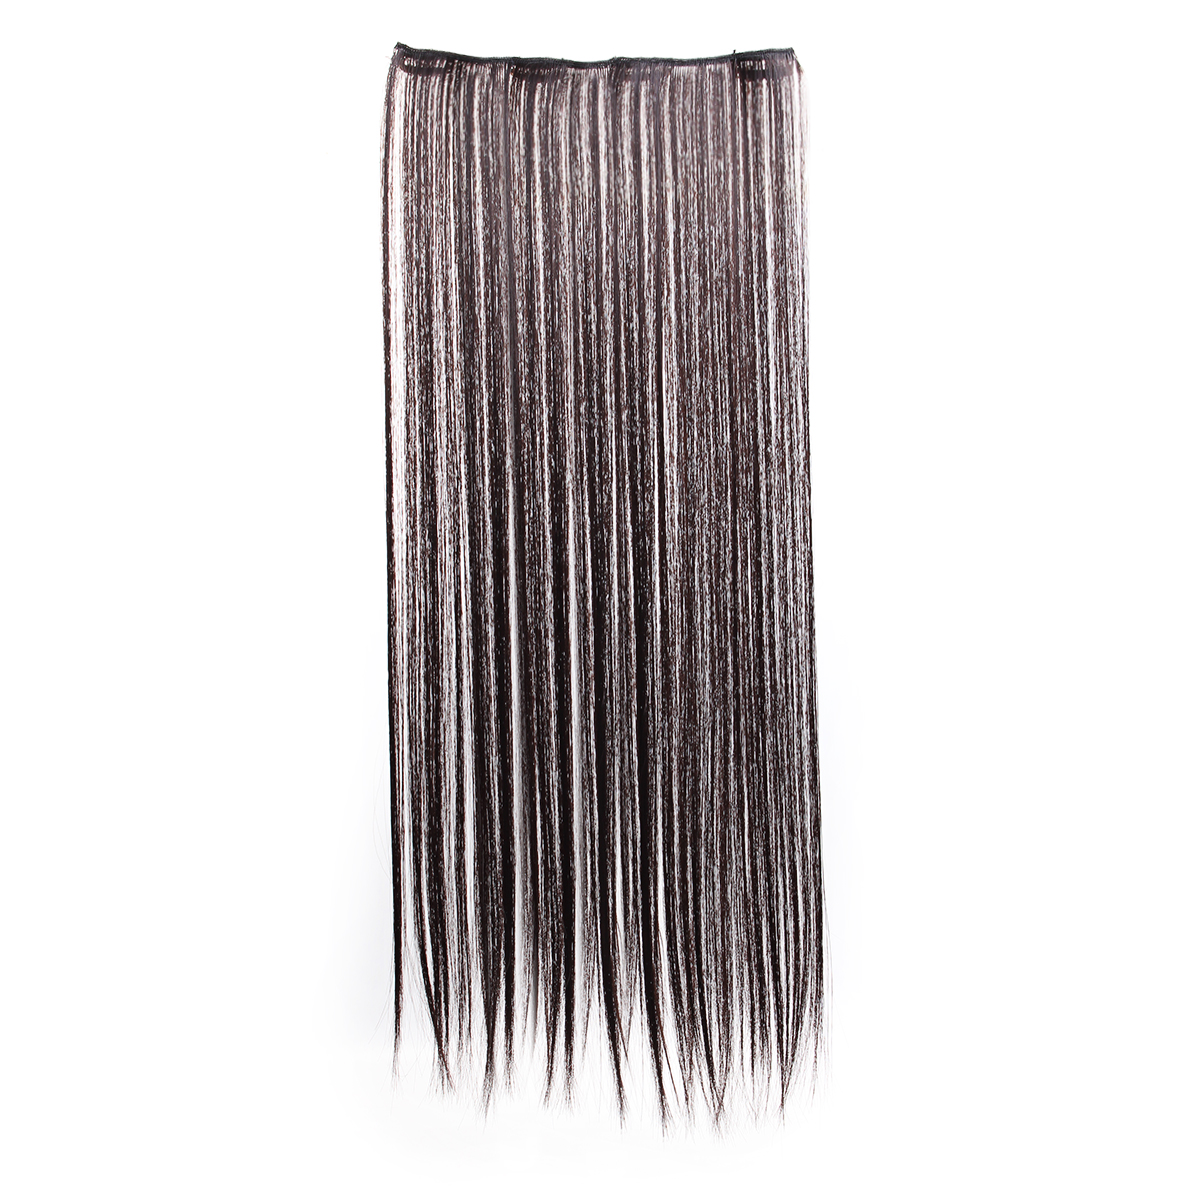 7Pcs-Clip-In-Synthetic-Chemical-Fiber-Human-Hair-Extensions-22-Long-Straight-1373137